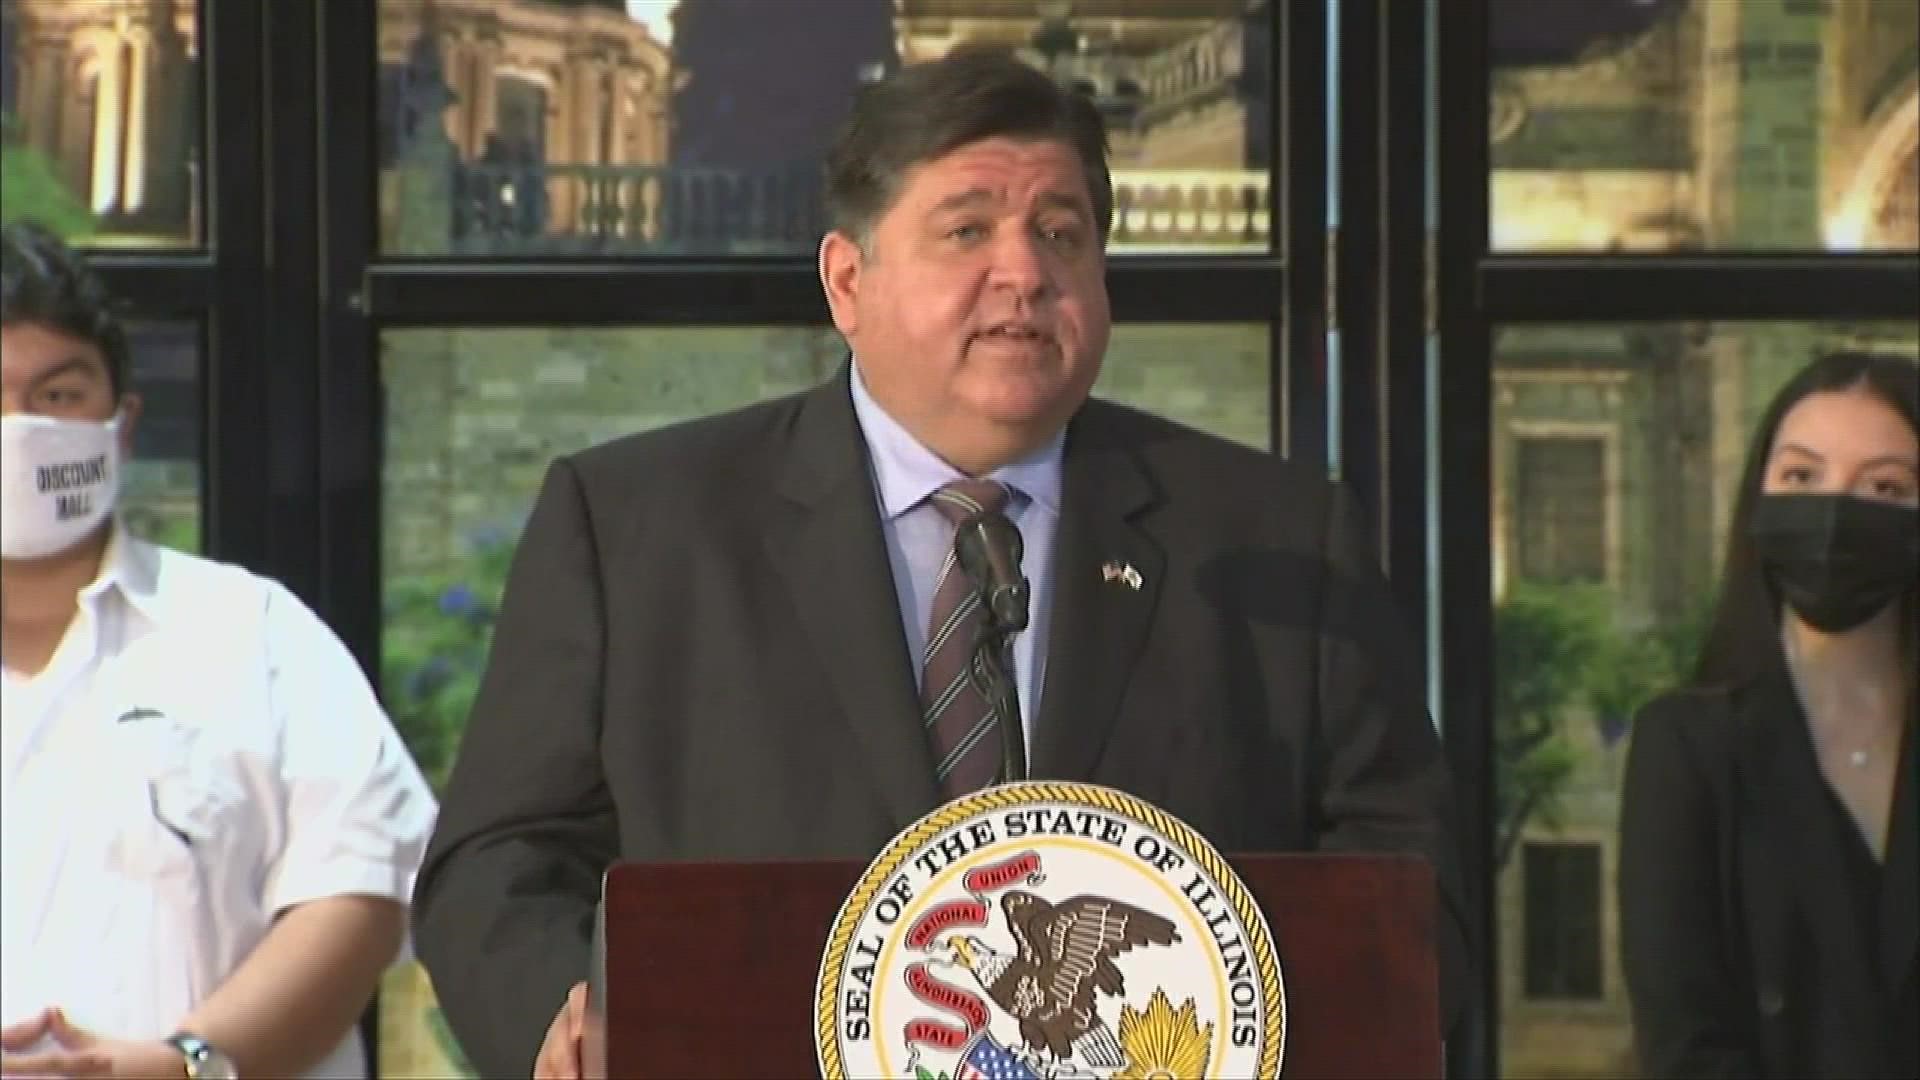 Governor Pritzker announced the first wave of grants as a part of the 'Back to Business' program, giving a boost to small businesses still recovering from COVID-19.